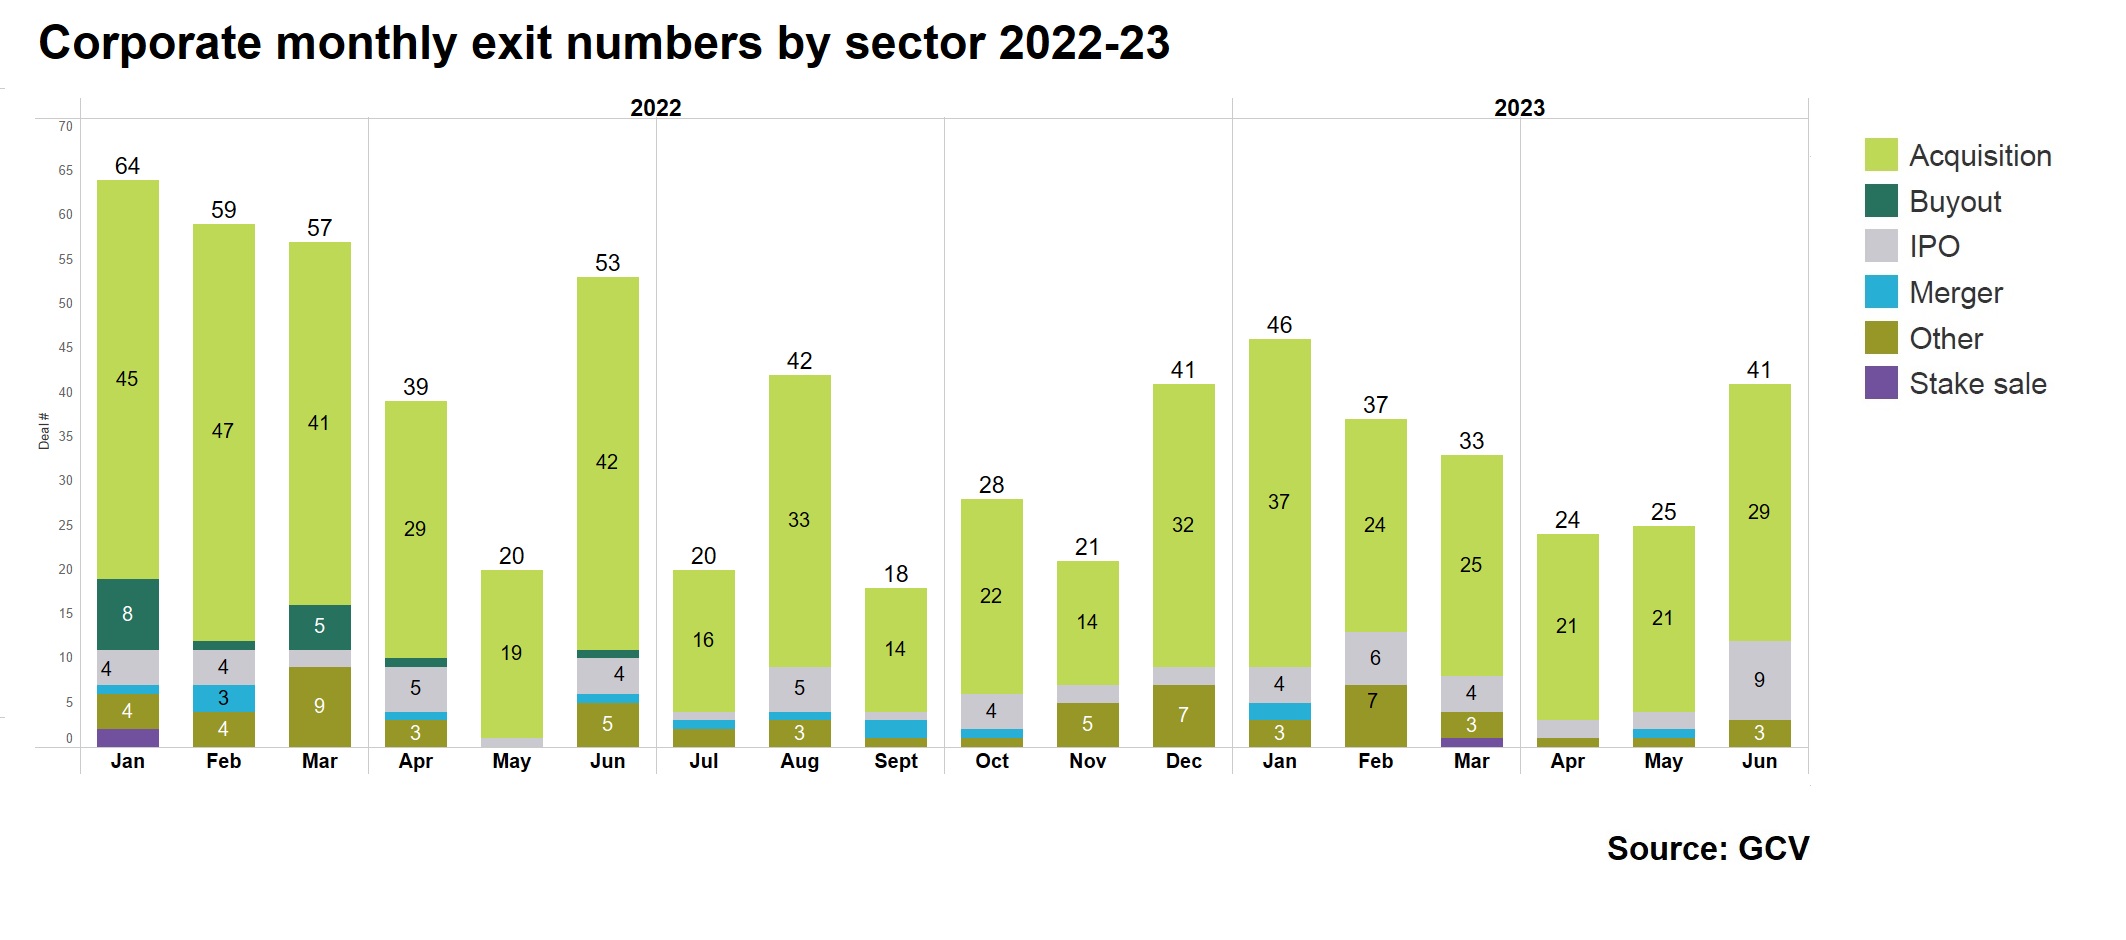 Bar chart showing monthly exit numbers broken down by sector 2022-23. Source: GCV